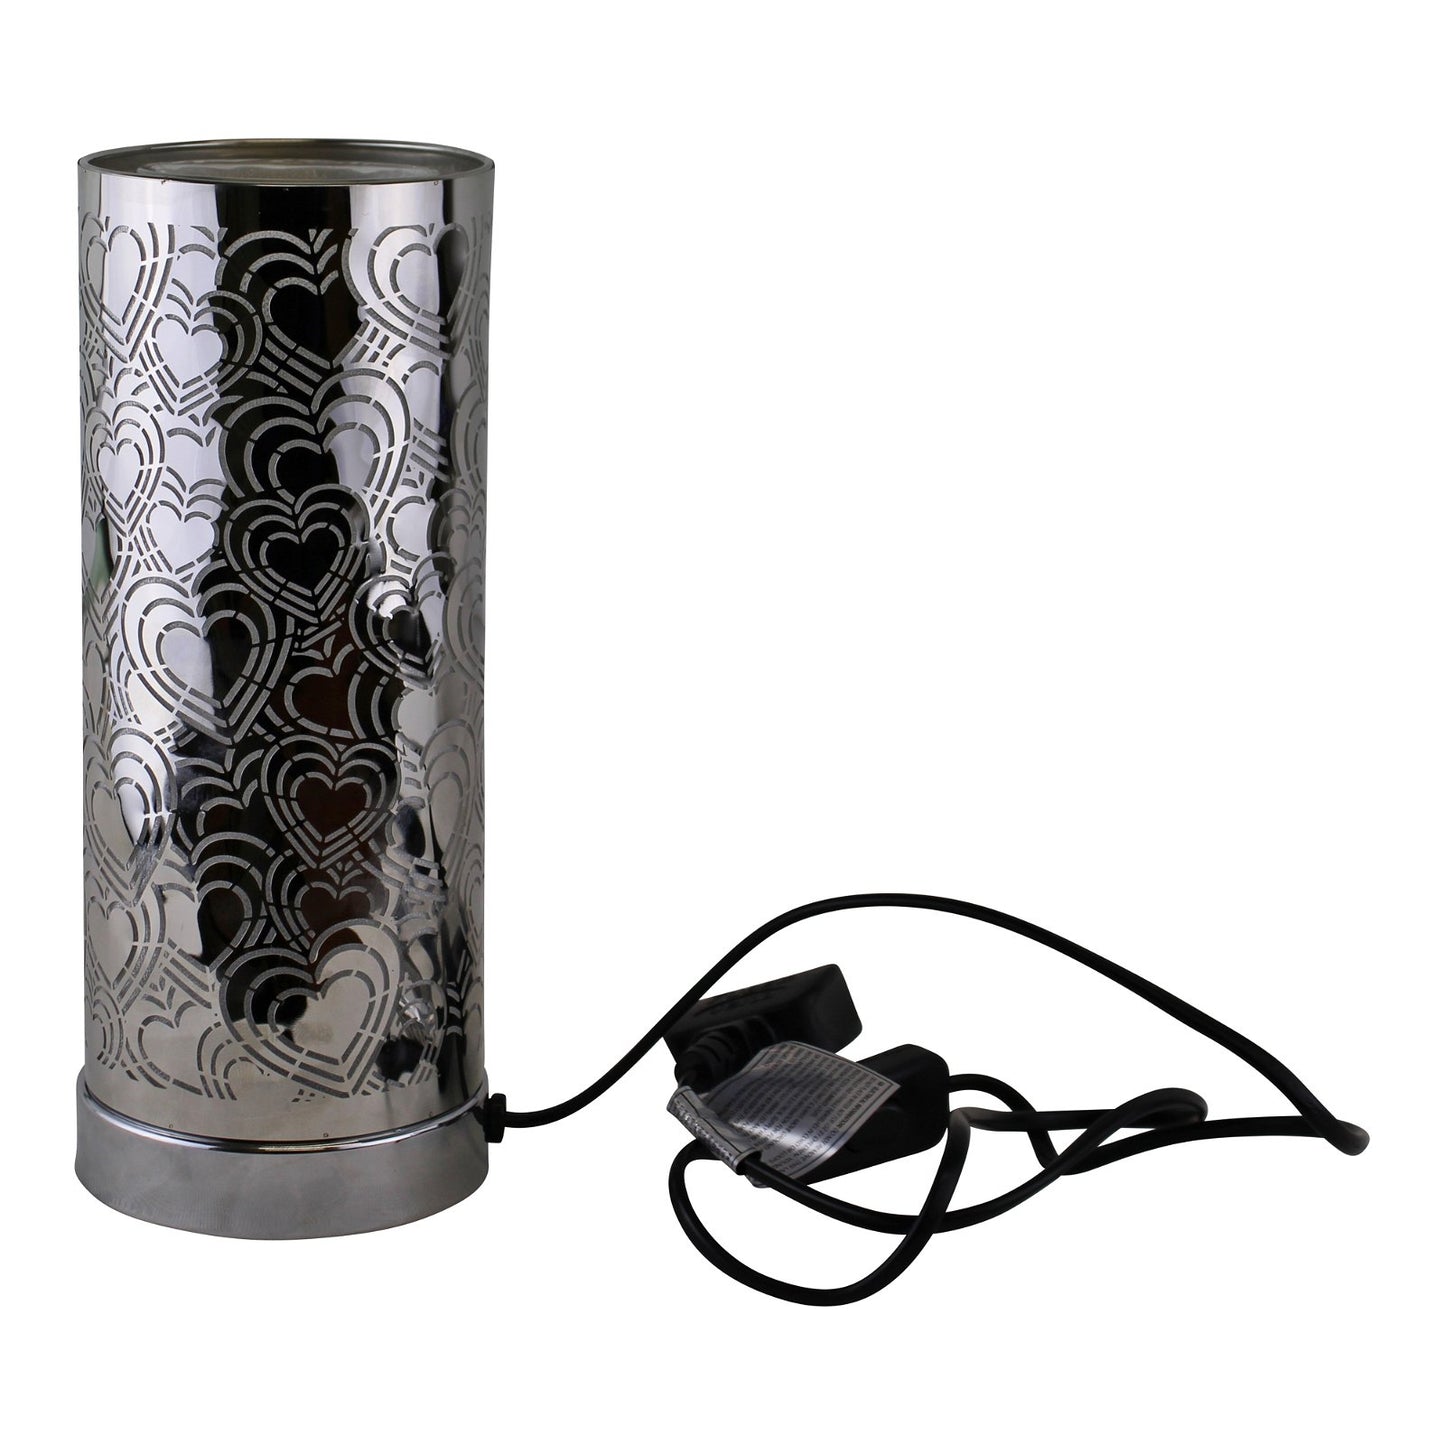 Heart Design Colour Changing LED Lamp & Aroma Diffuser in Silver